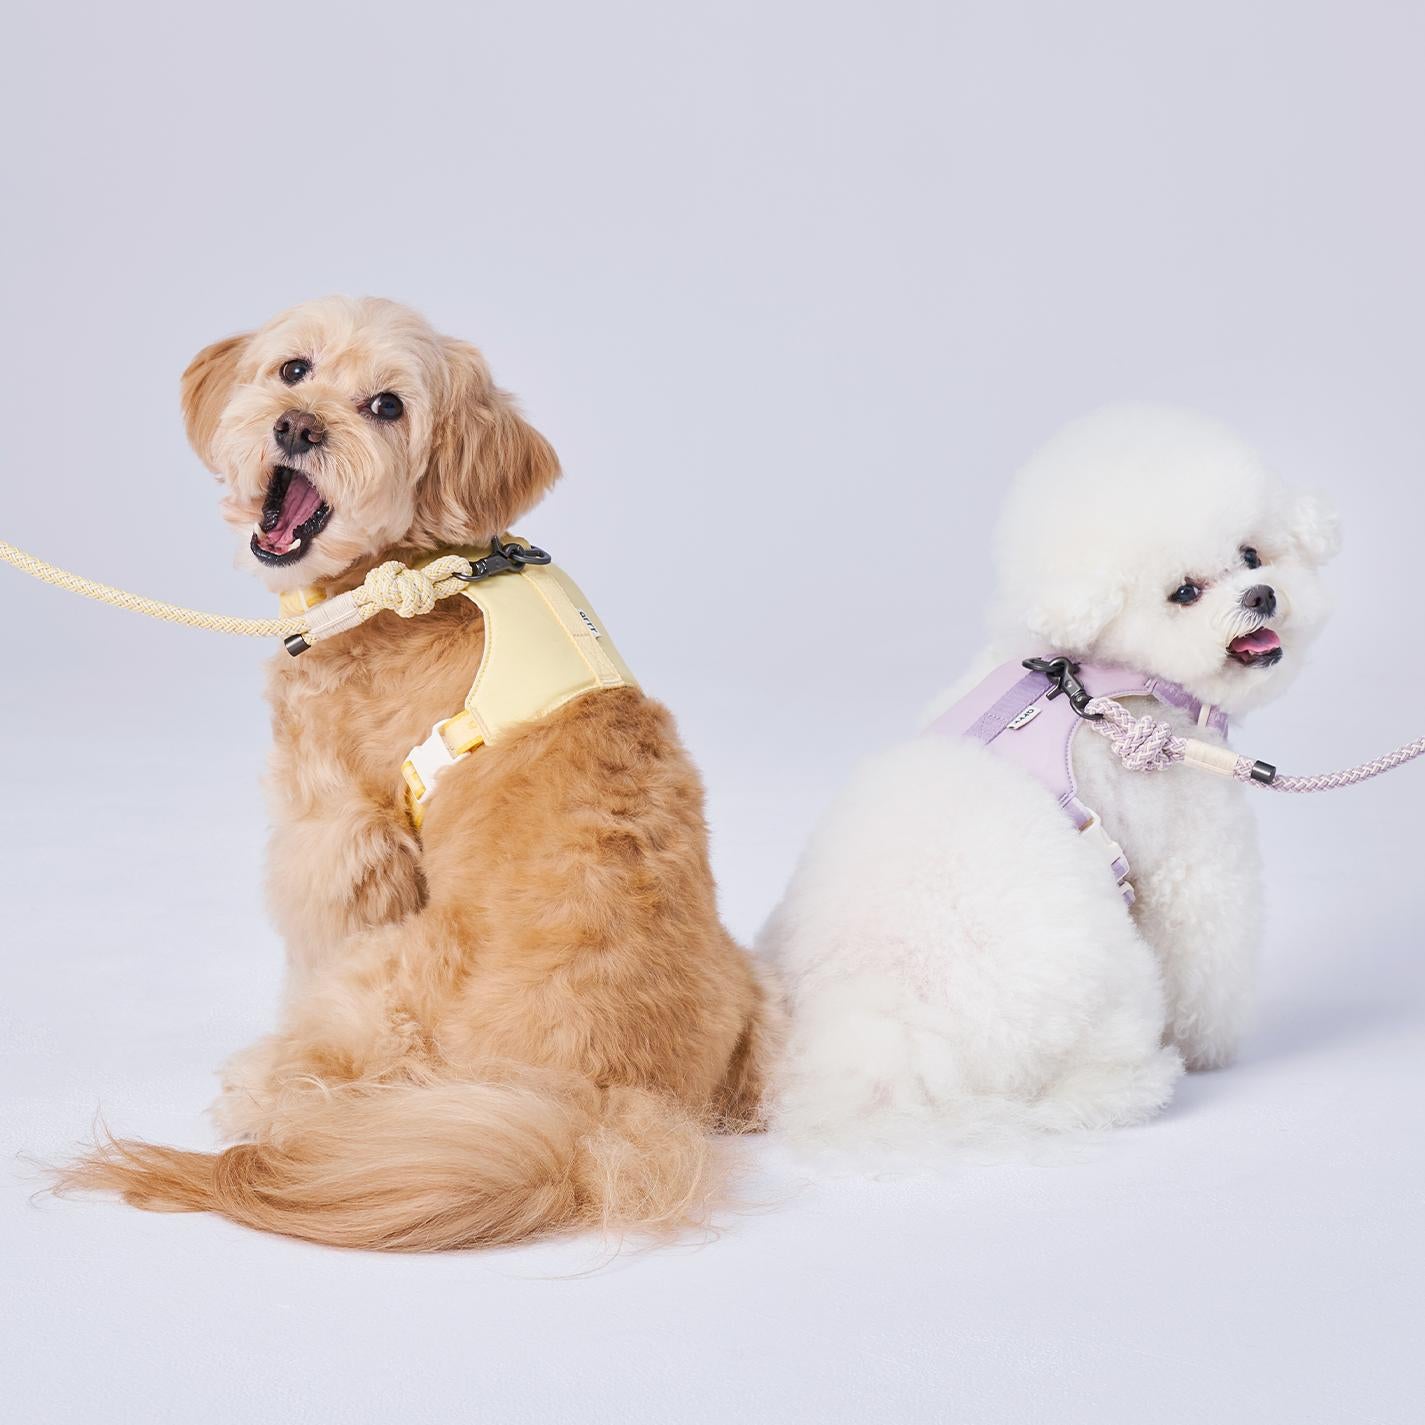 Arrr bouncing dog harness in 2 colours, butter yellow and lily lavender. Best dog harness design with stretch band and adjustable straps. 